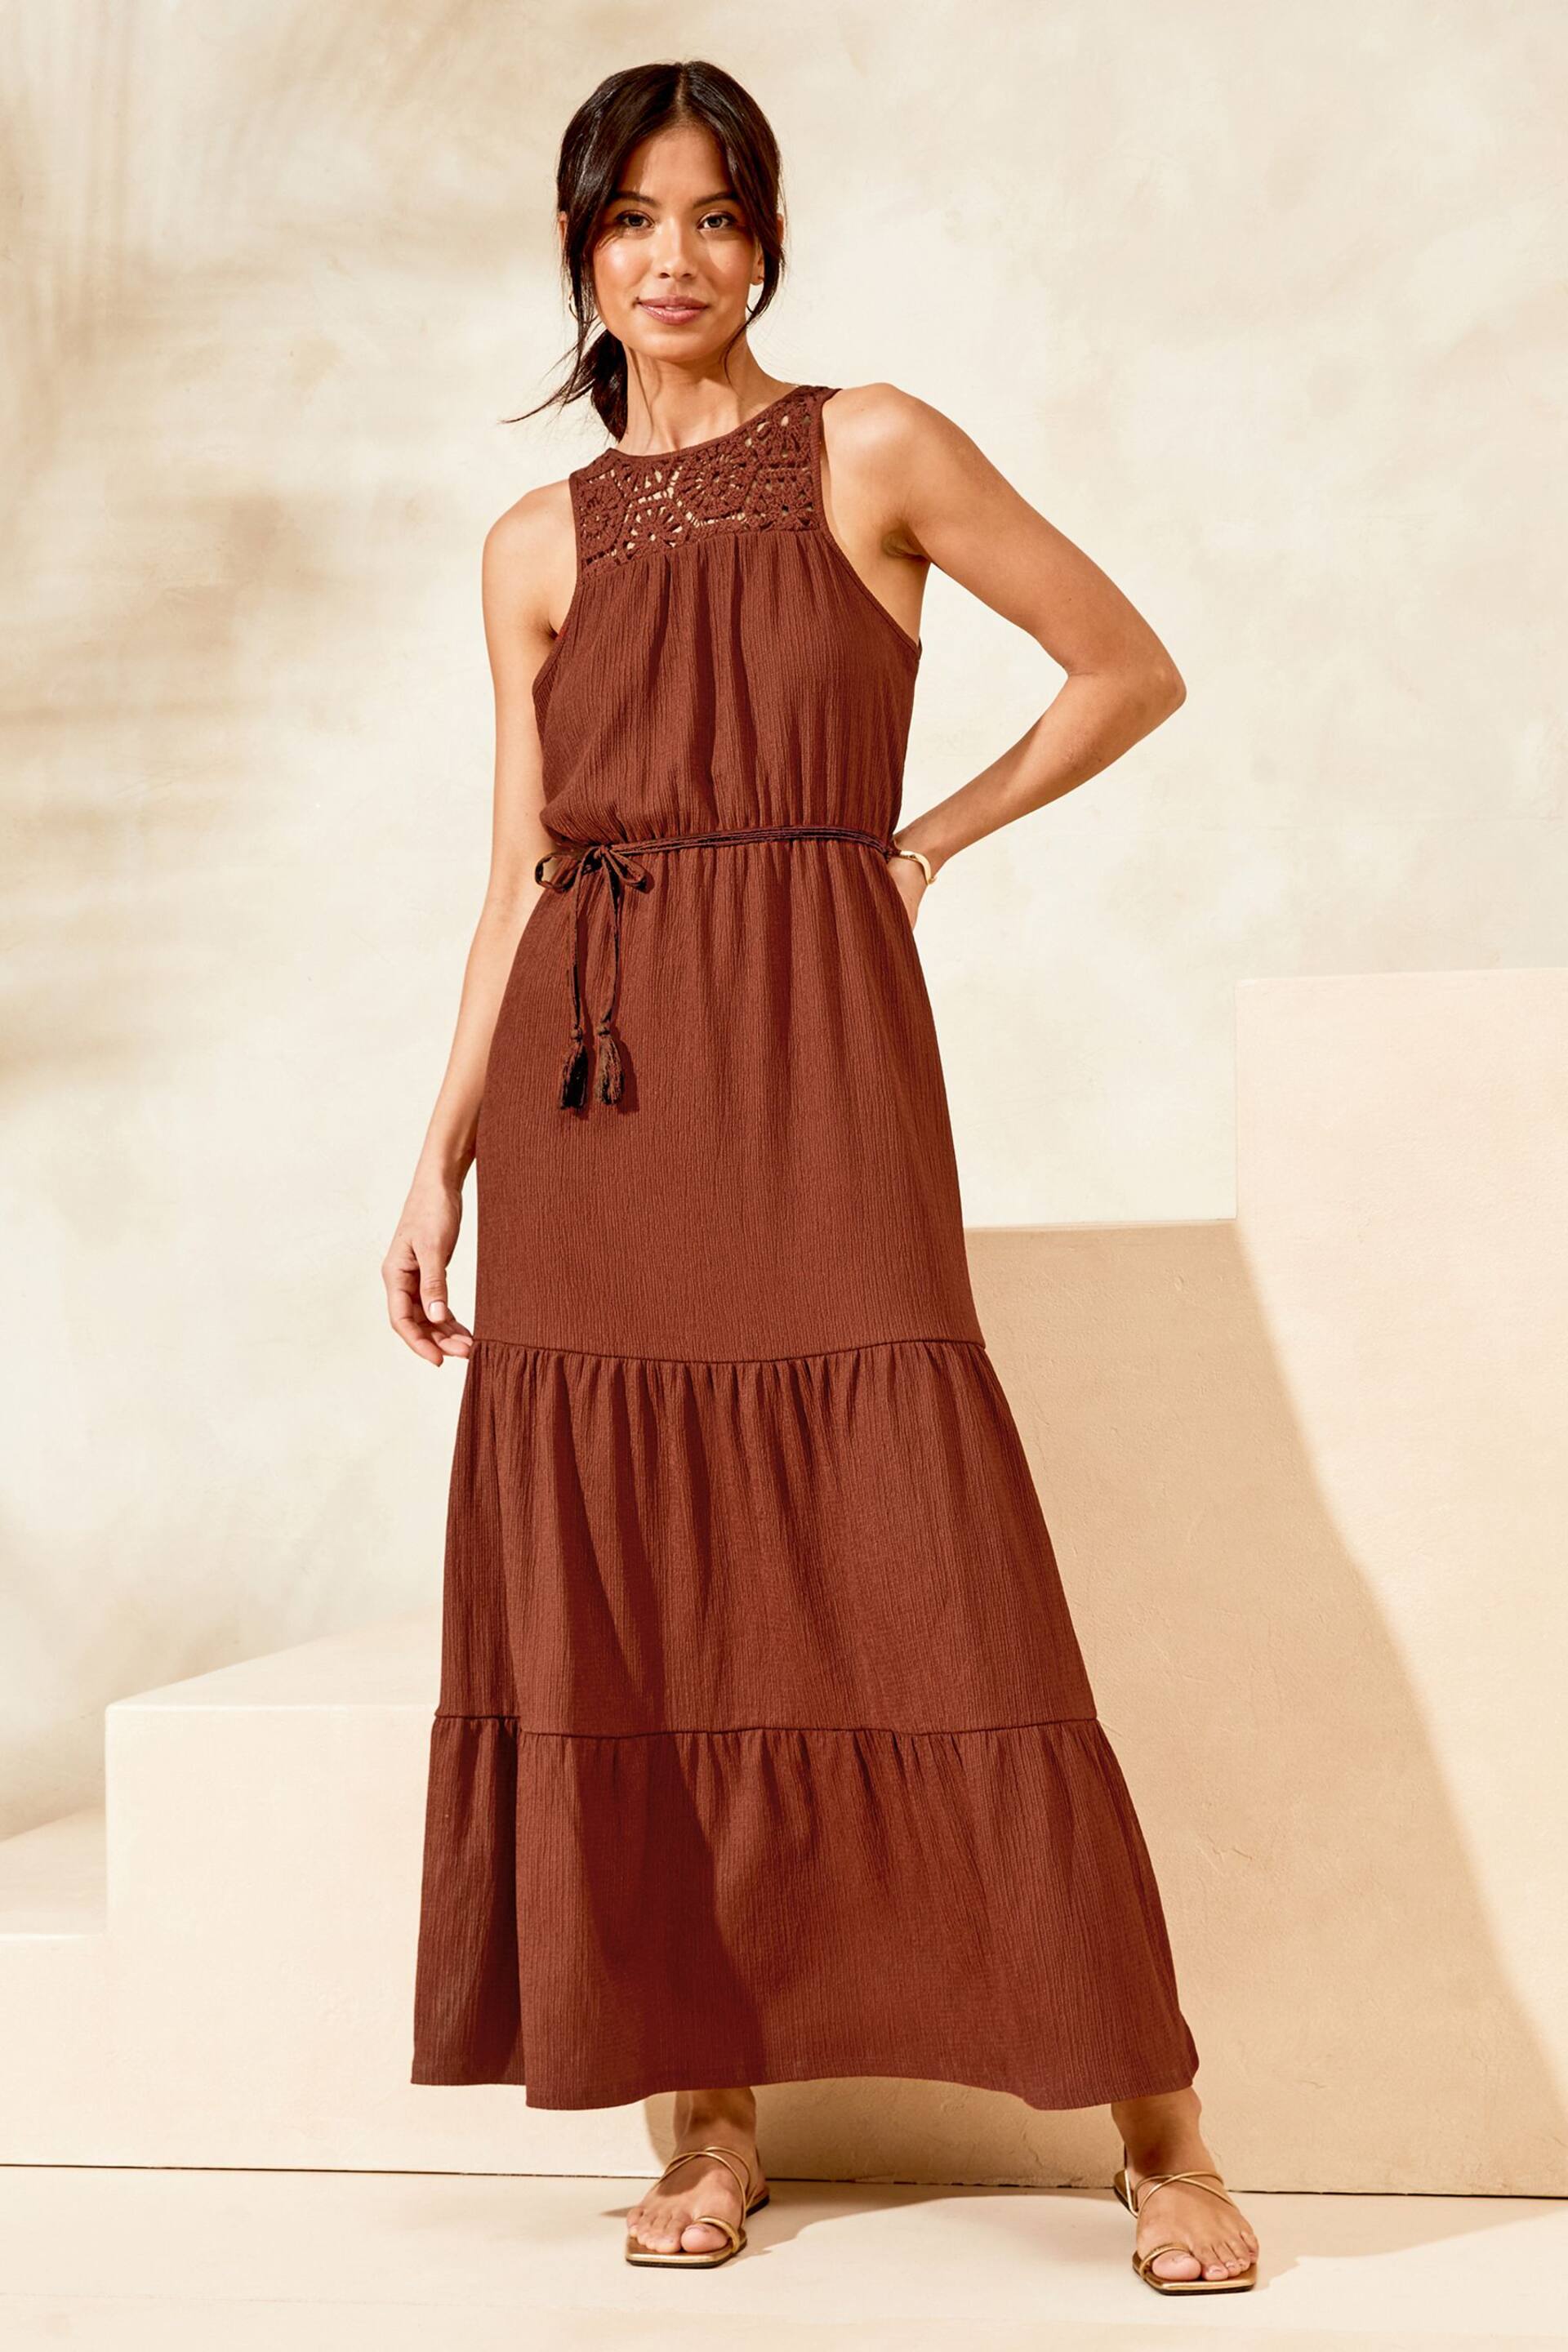 Lipsy Brown Petite Crochet Hybrid Racer Tiered Holiday Summer Cover Up Dress - Image 1 of 4